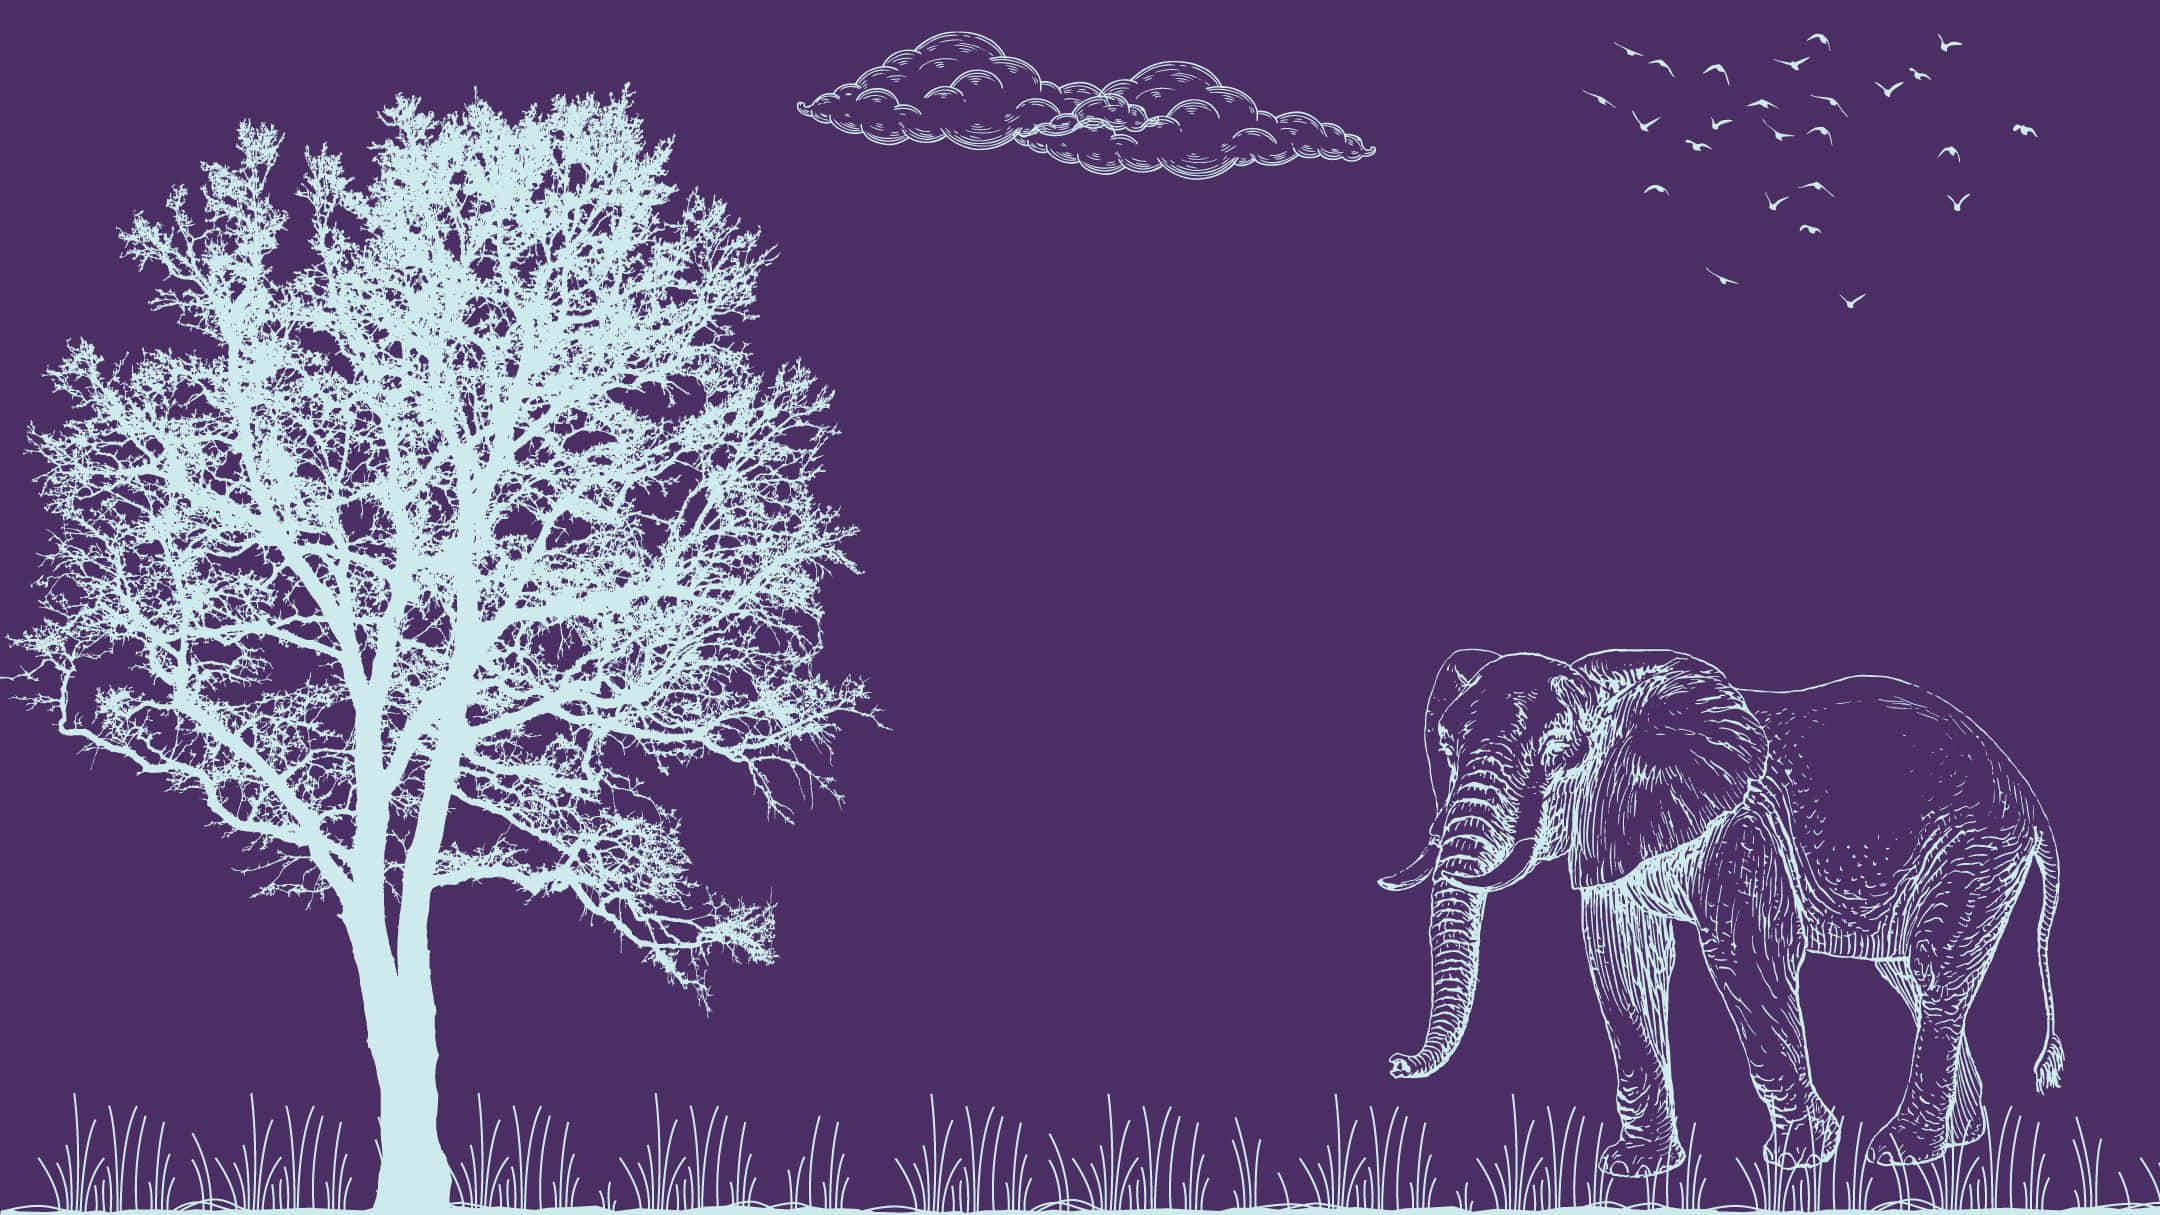 An Elephant And Tree In The Field Background